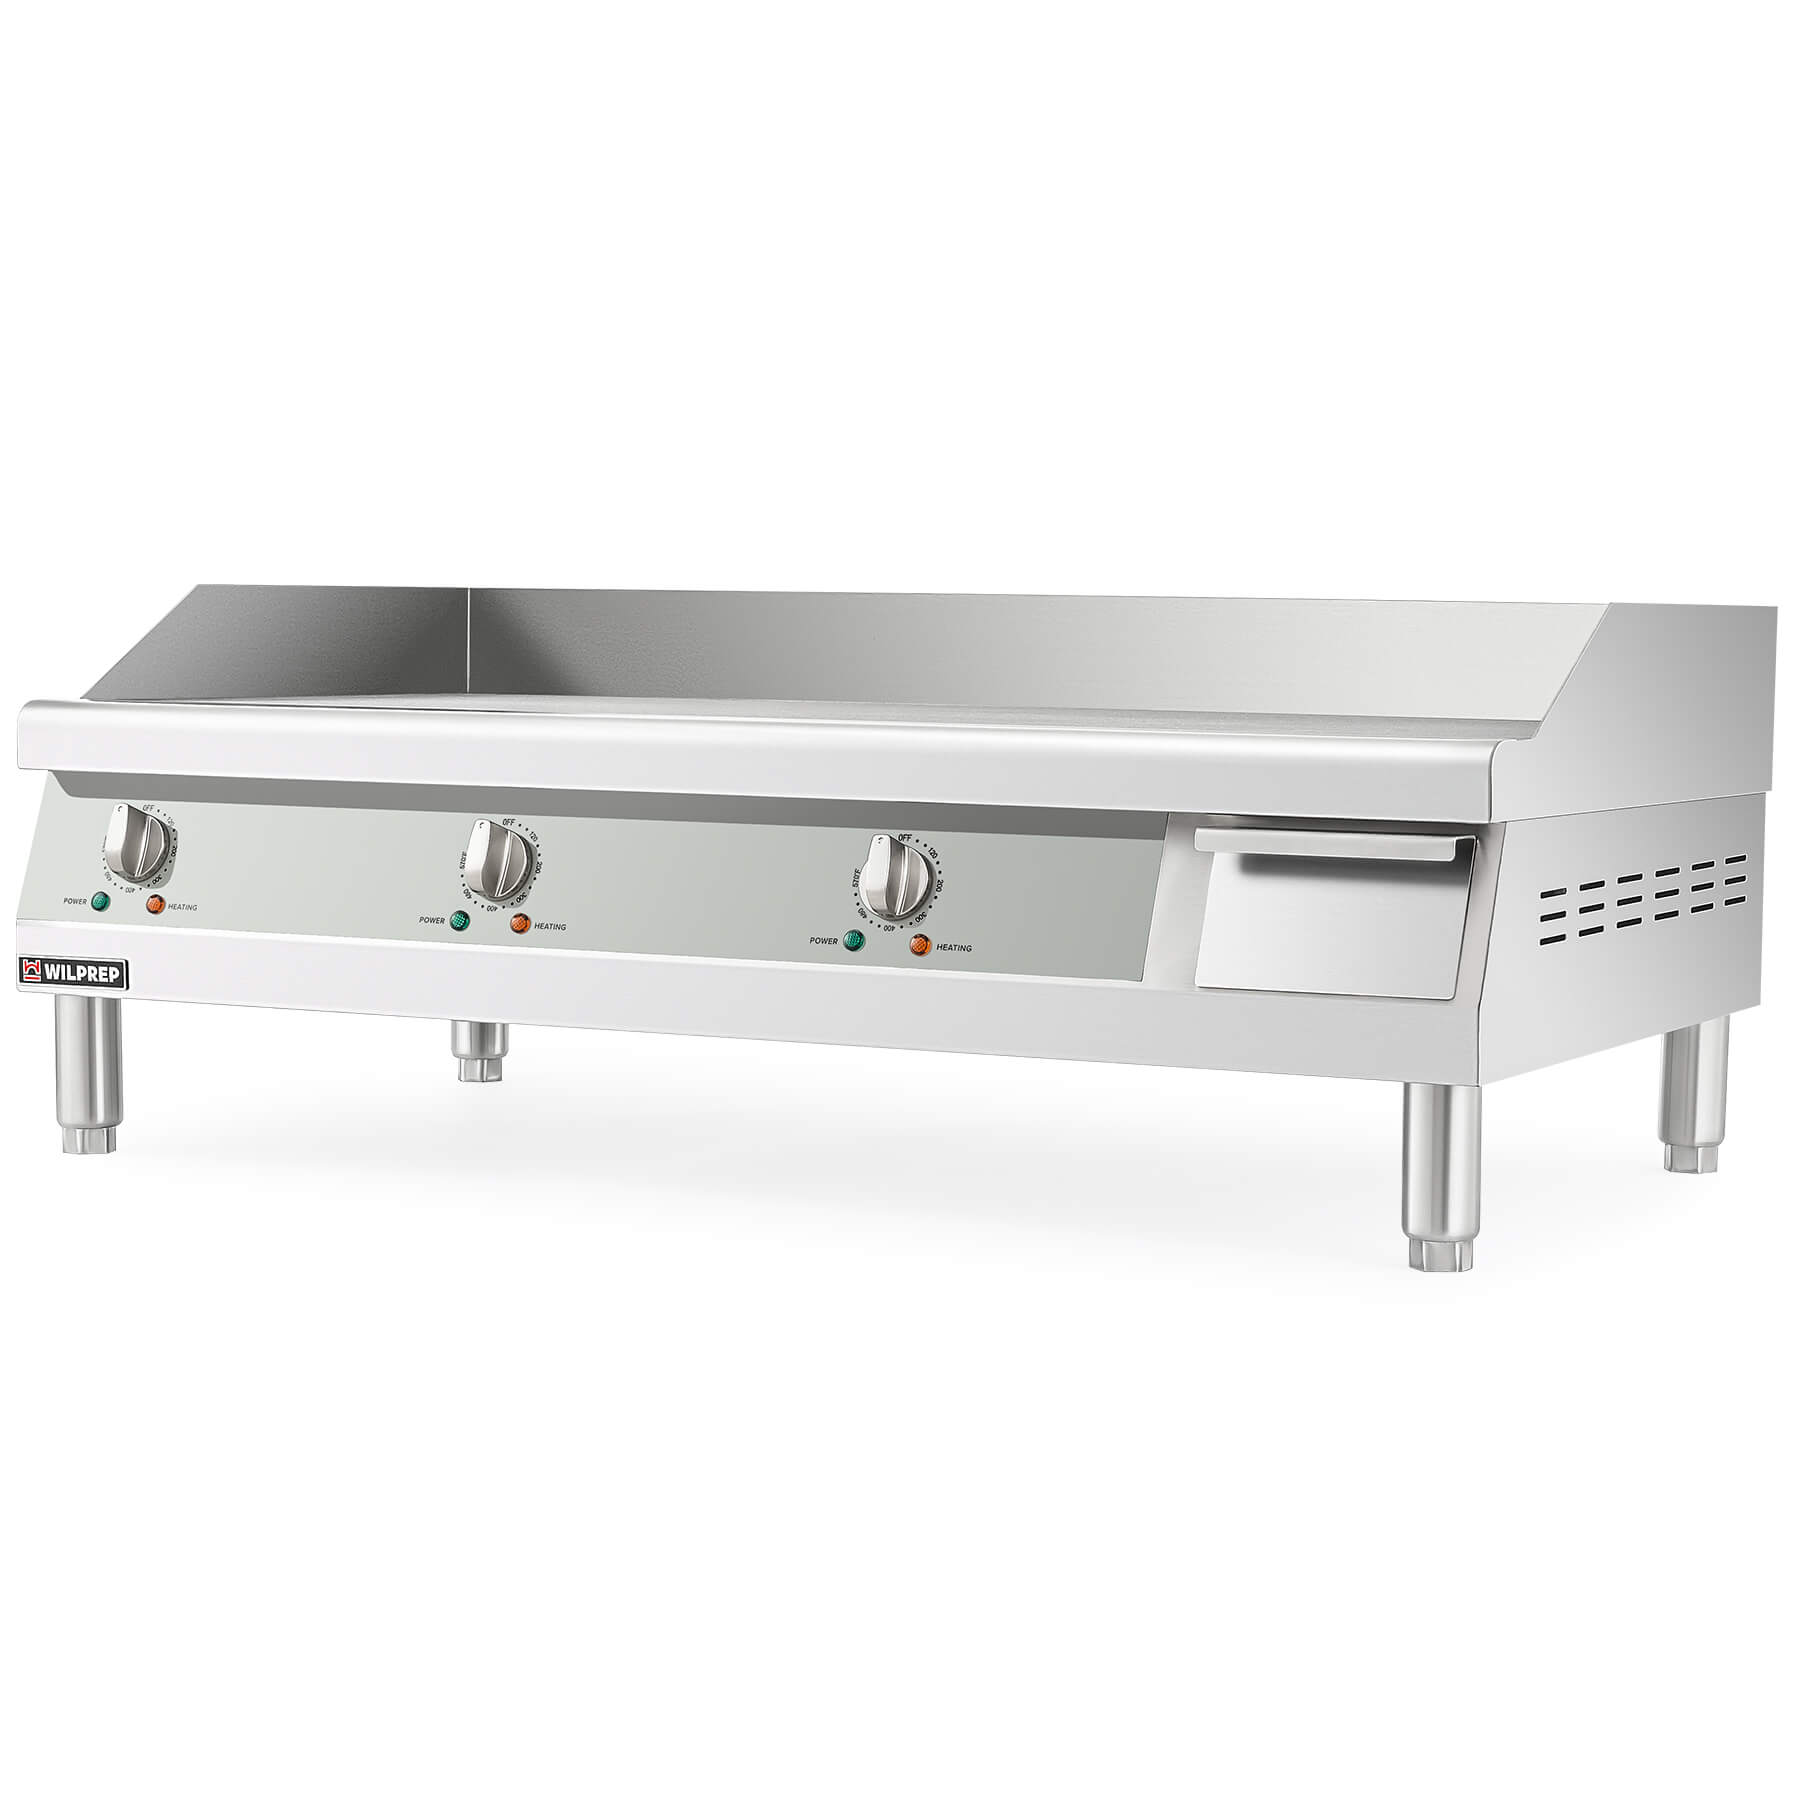 36 Inch Commercial Propane Griddle